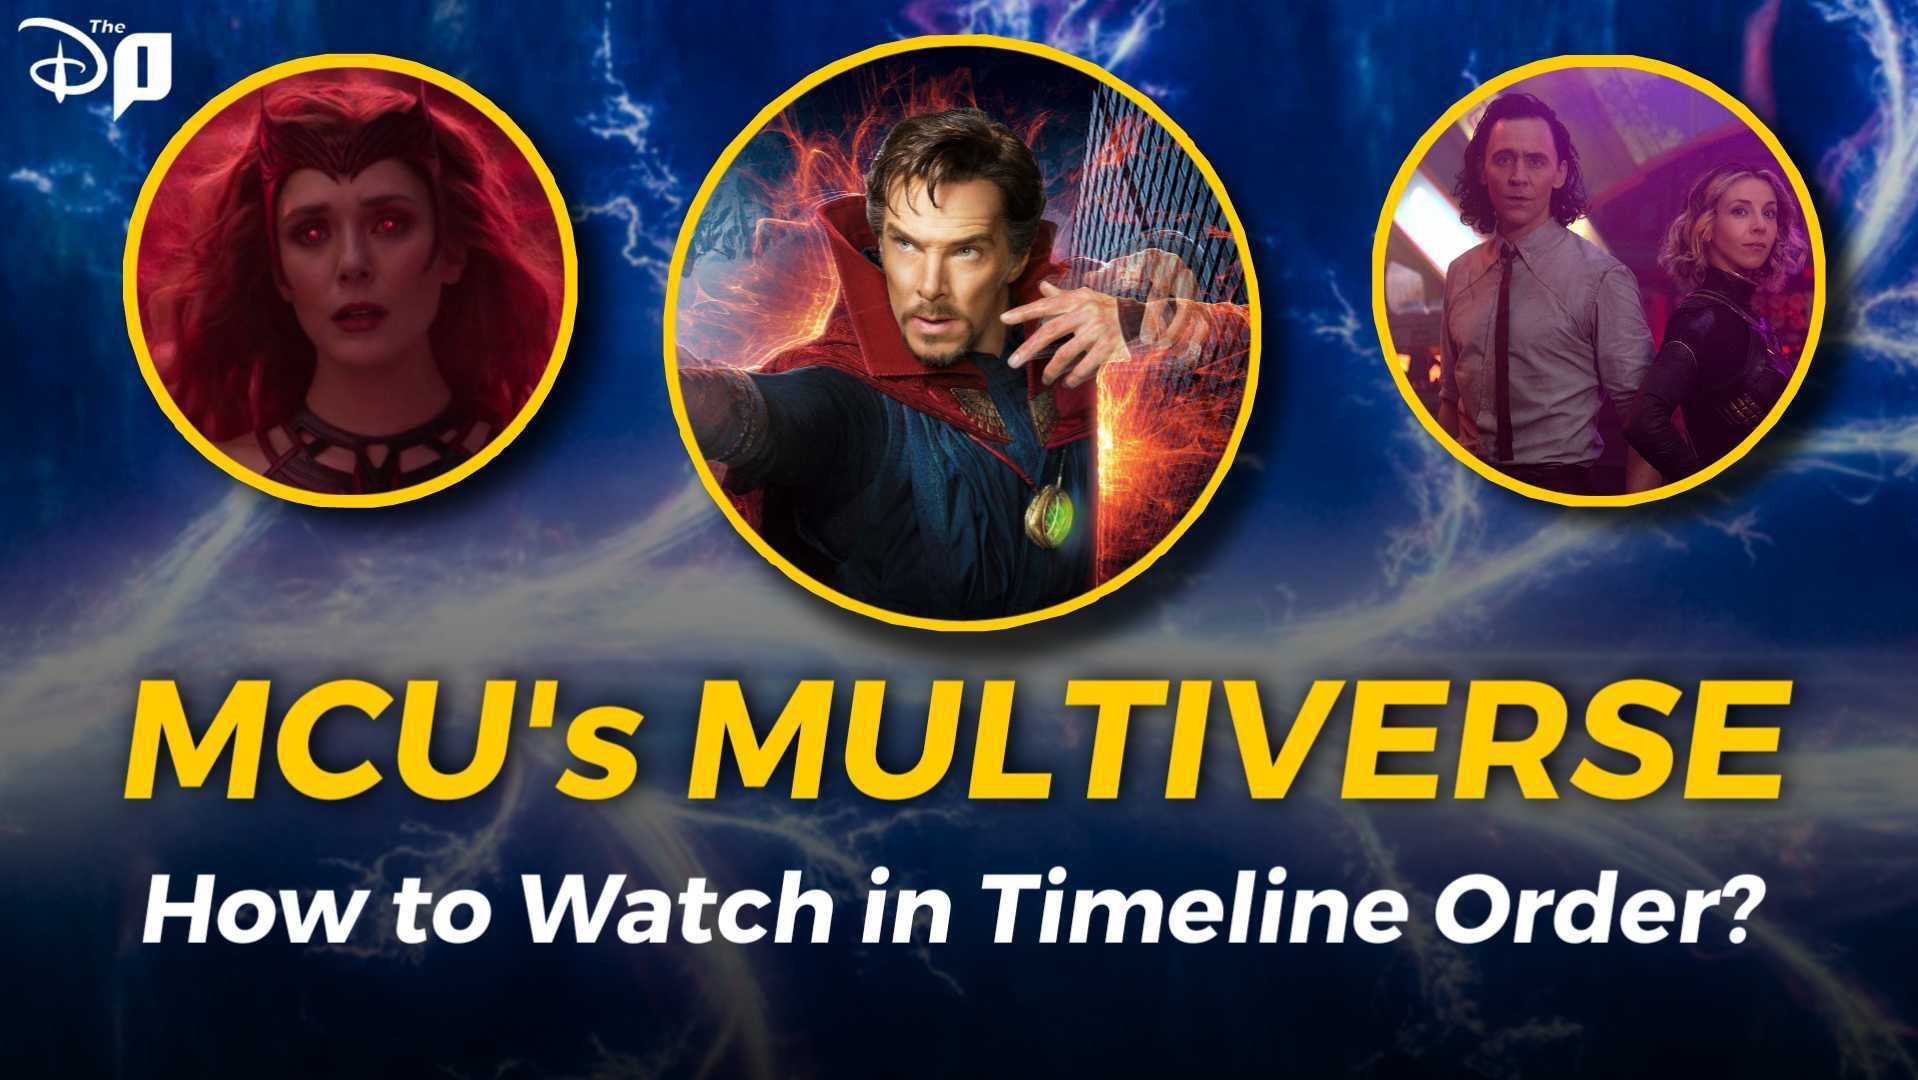 How To Watch the Multi-verse MCU Films in Timeline Order